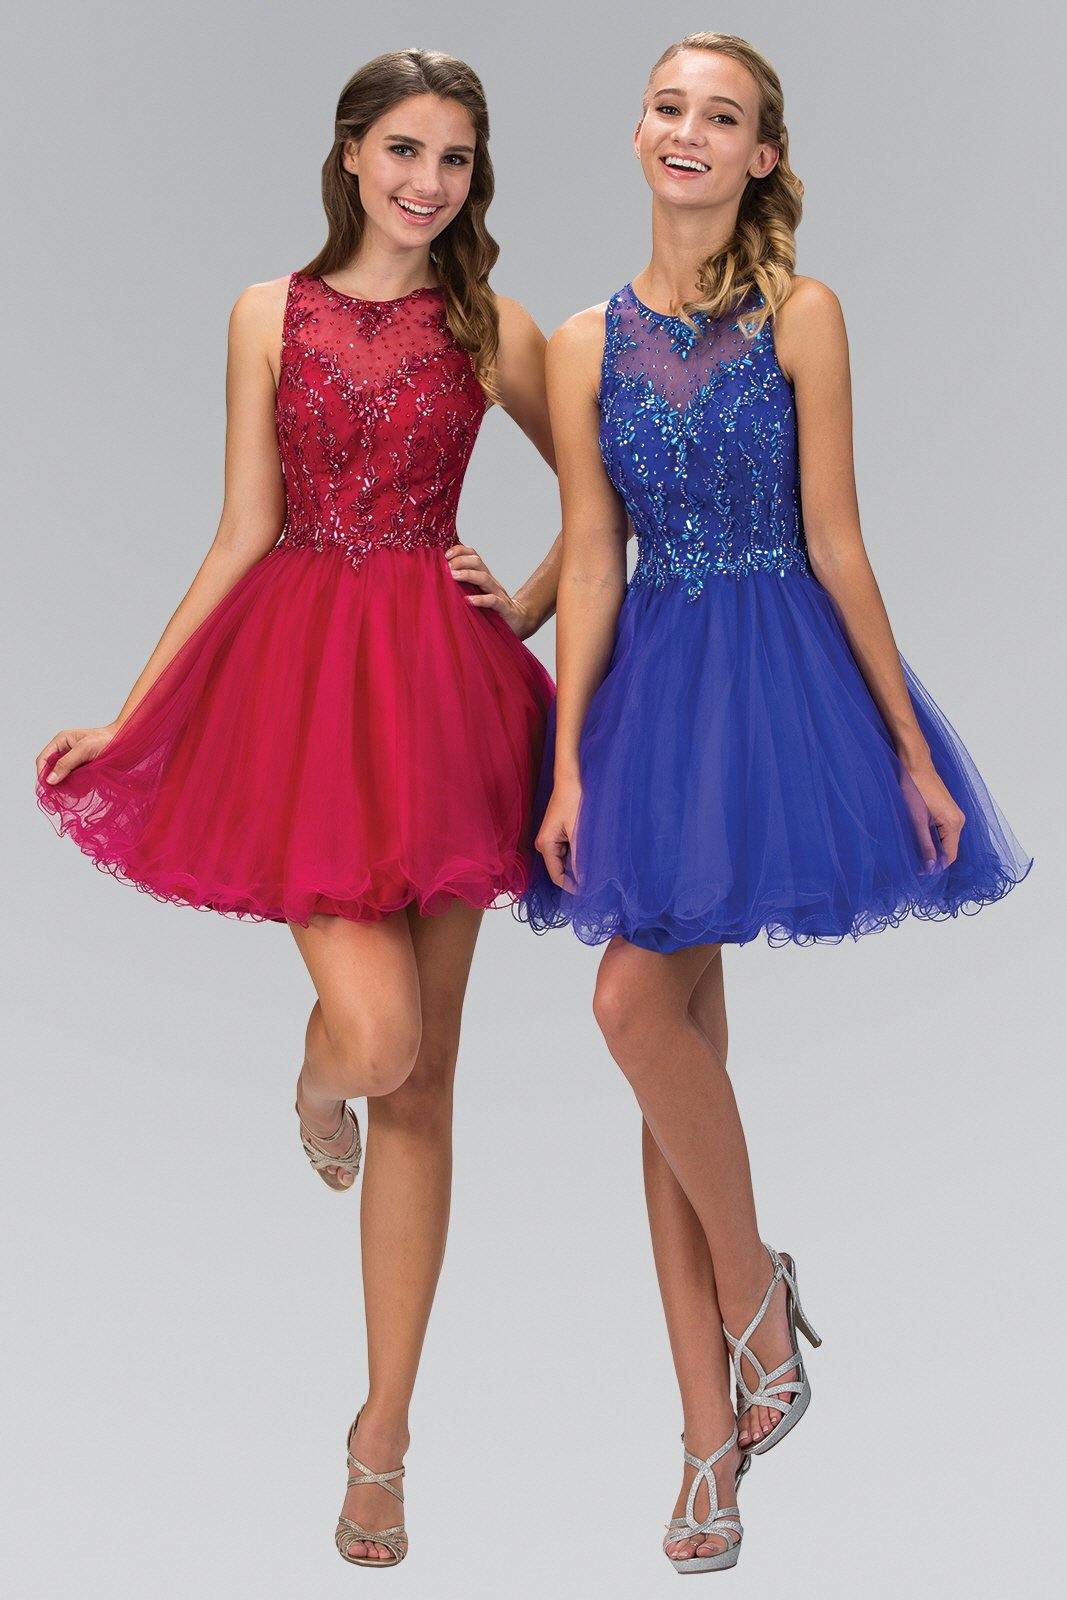 Prom Short Sleeveless Homecoming Dress Sale - The Dress Outlet